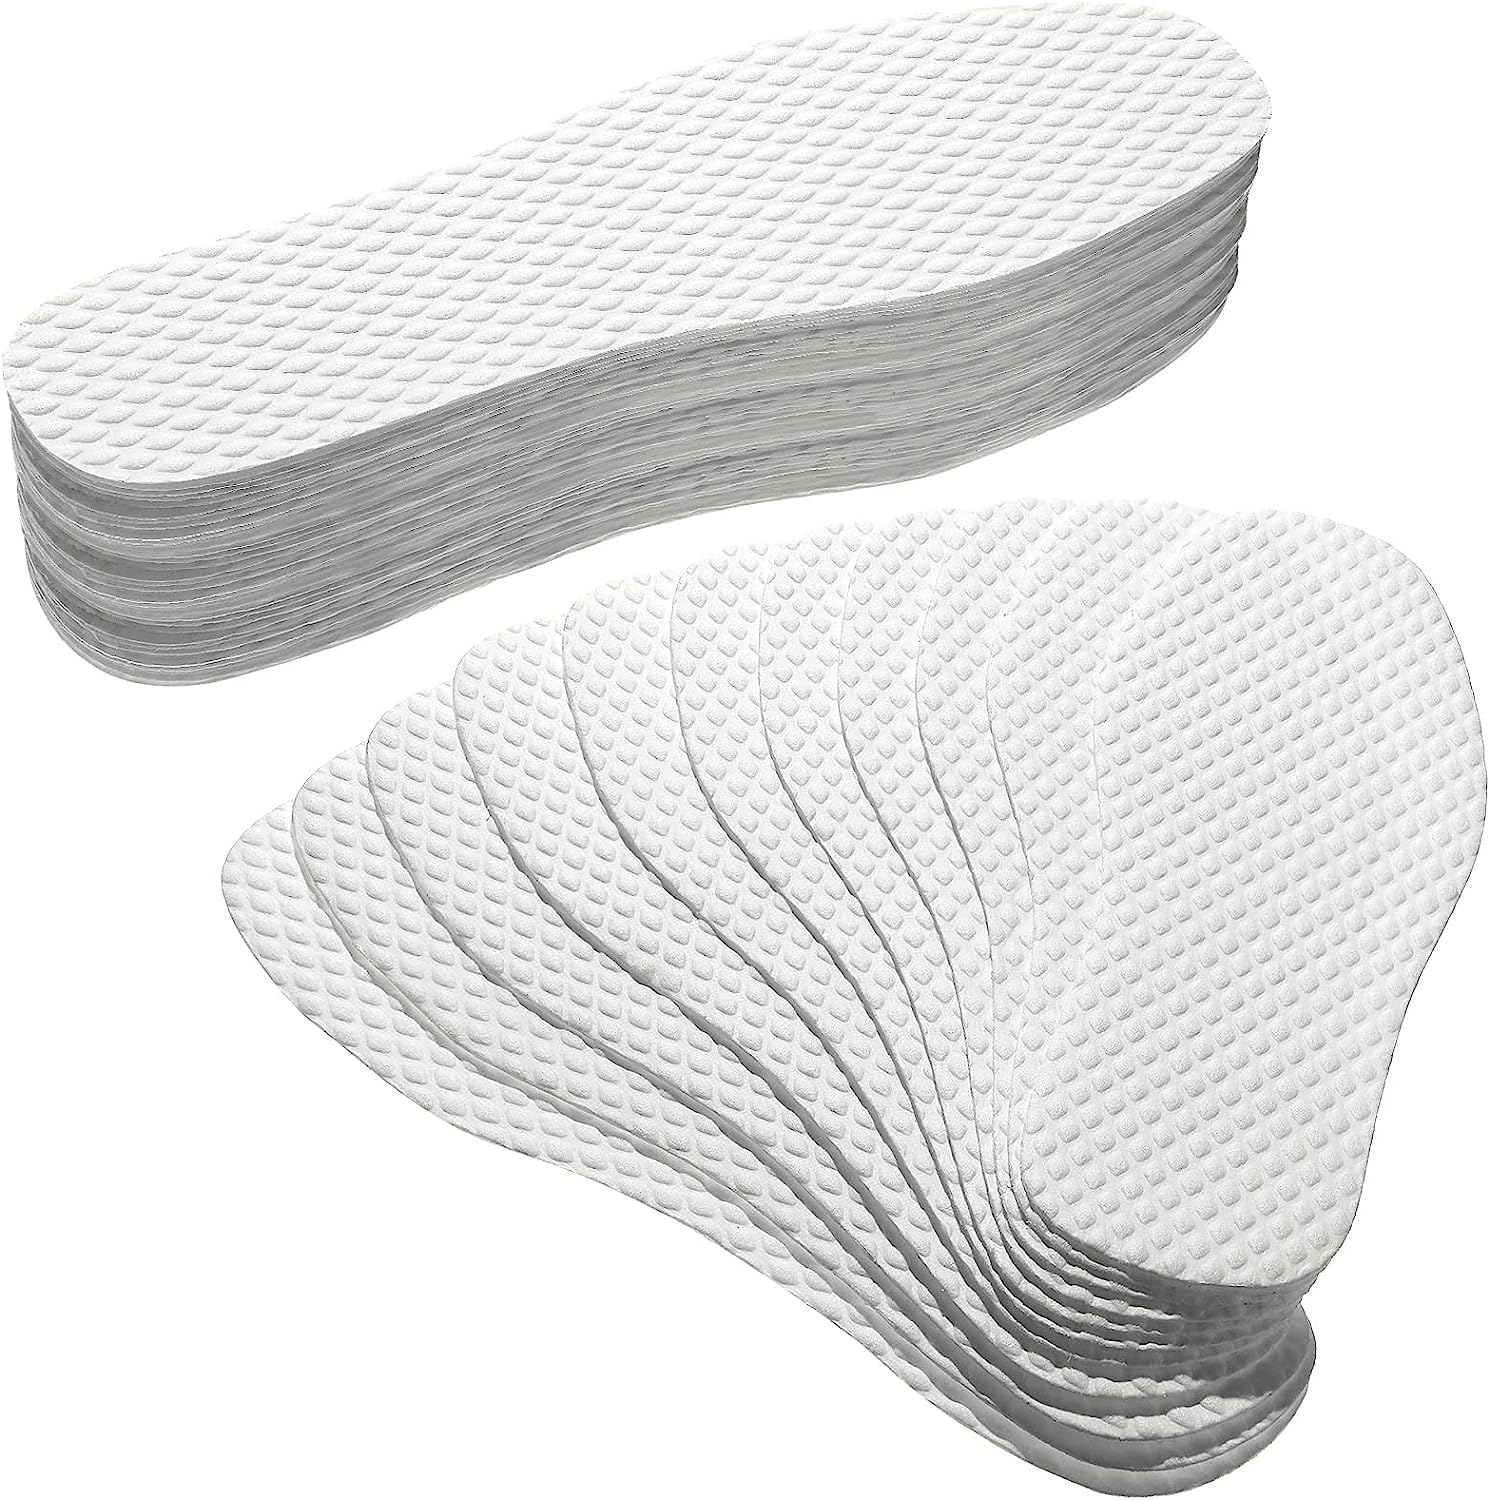 24 Pairs Disposable Shoe Liners Breathable Thin [...]